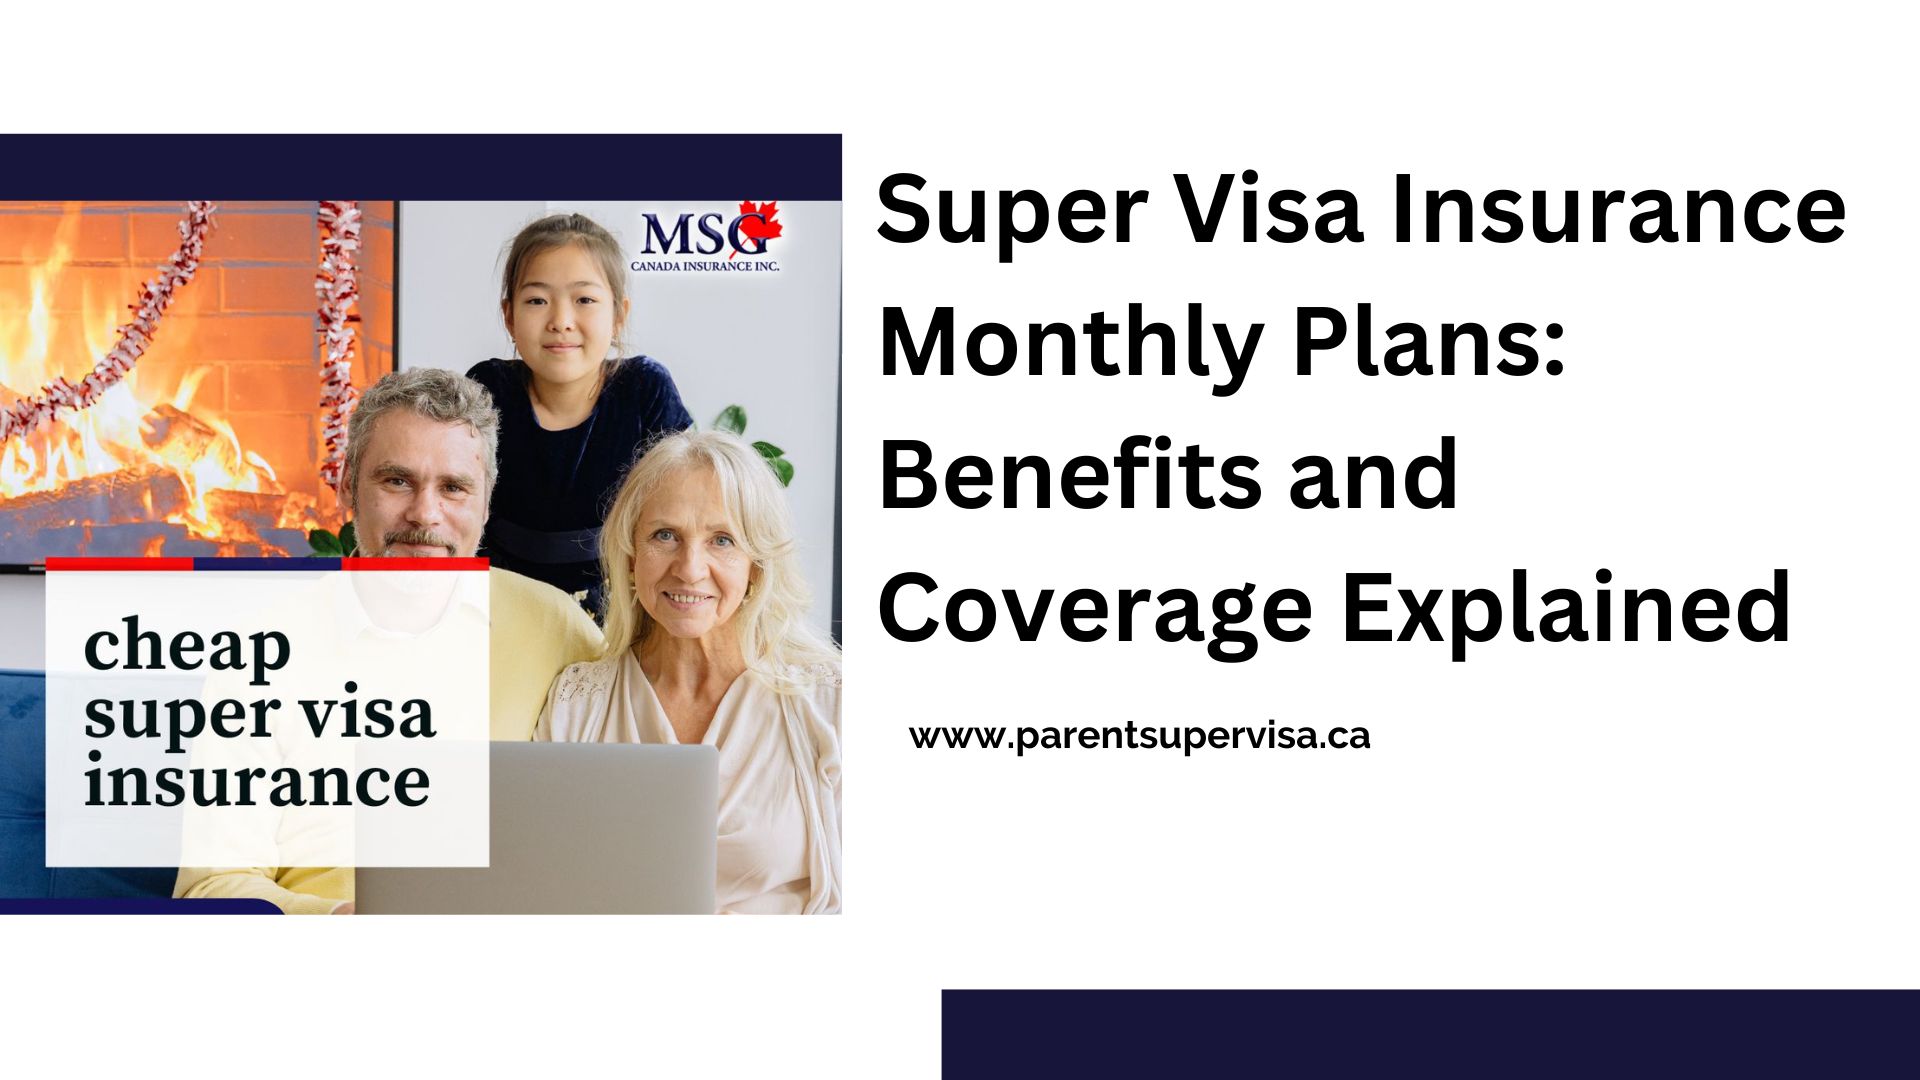 Super Visa Insurance Monthly Plans: Benefits and Coverage Explained